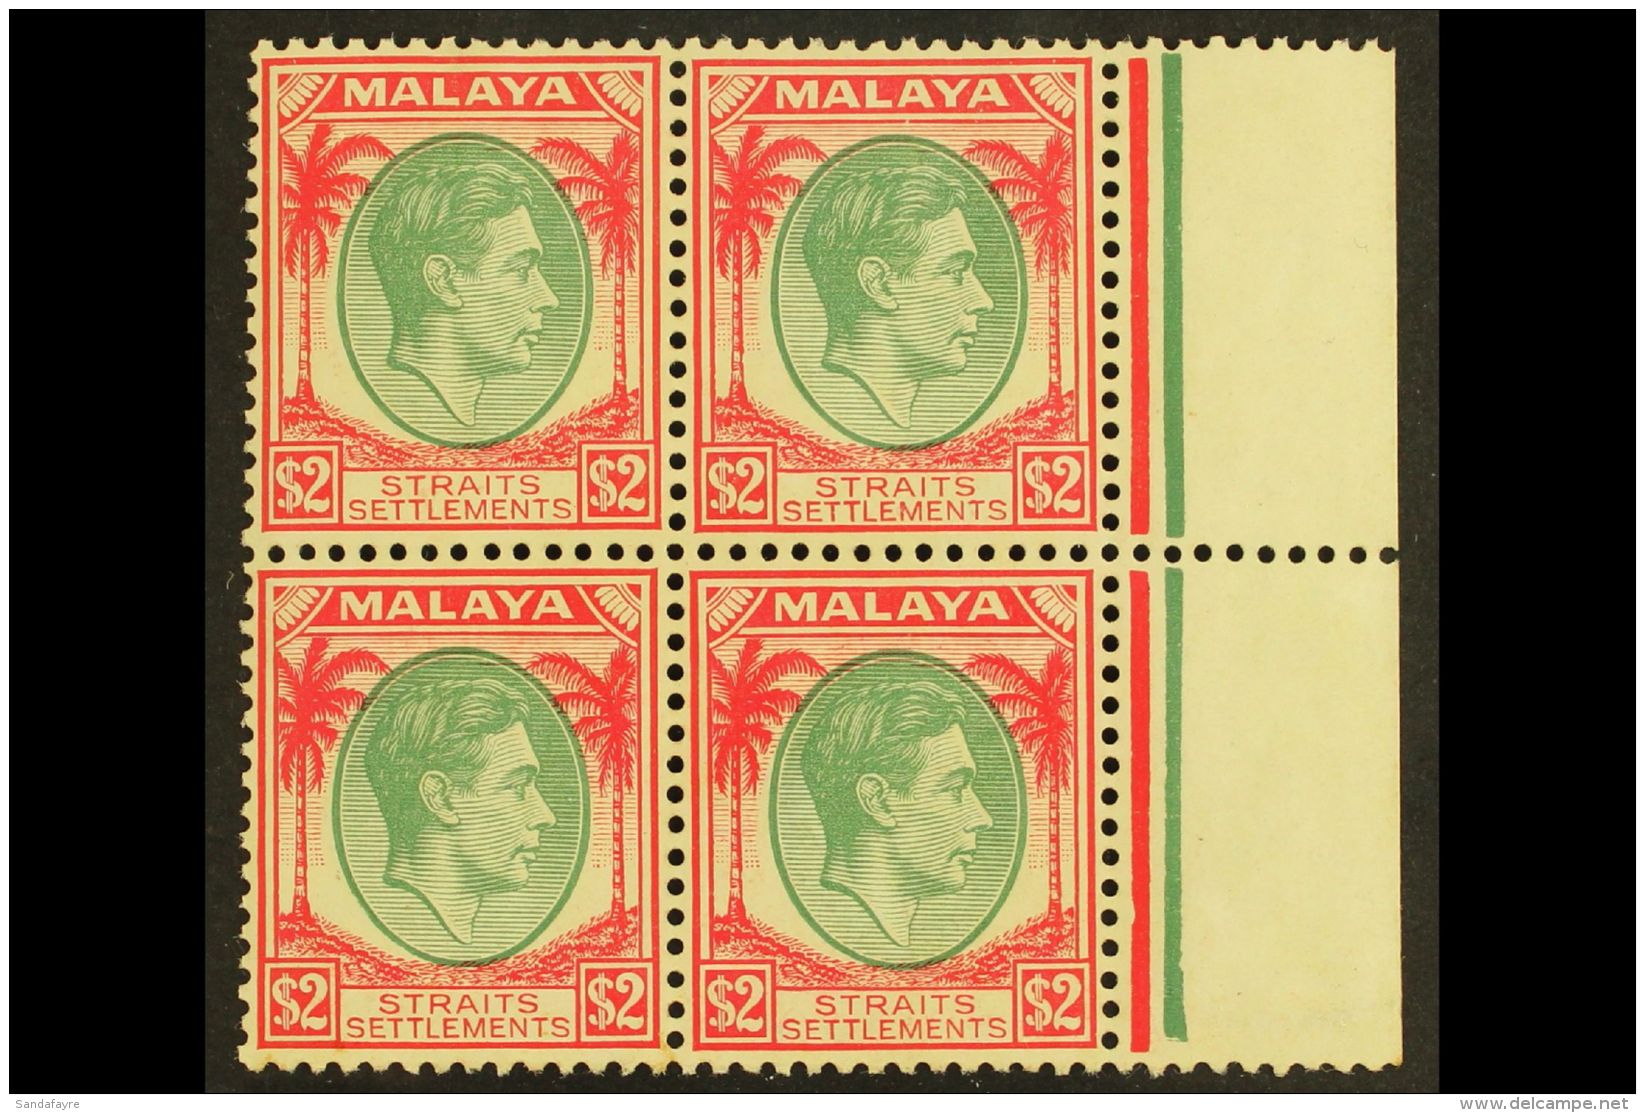 1937-41  $2 Green And Scarlet, SG 291, Never Hinged Mint Marginal BLOCK OF FOUR, Usual Streaky Gum. (4 Stamps)... - Straits Settlements